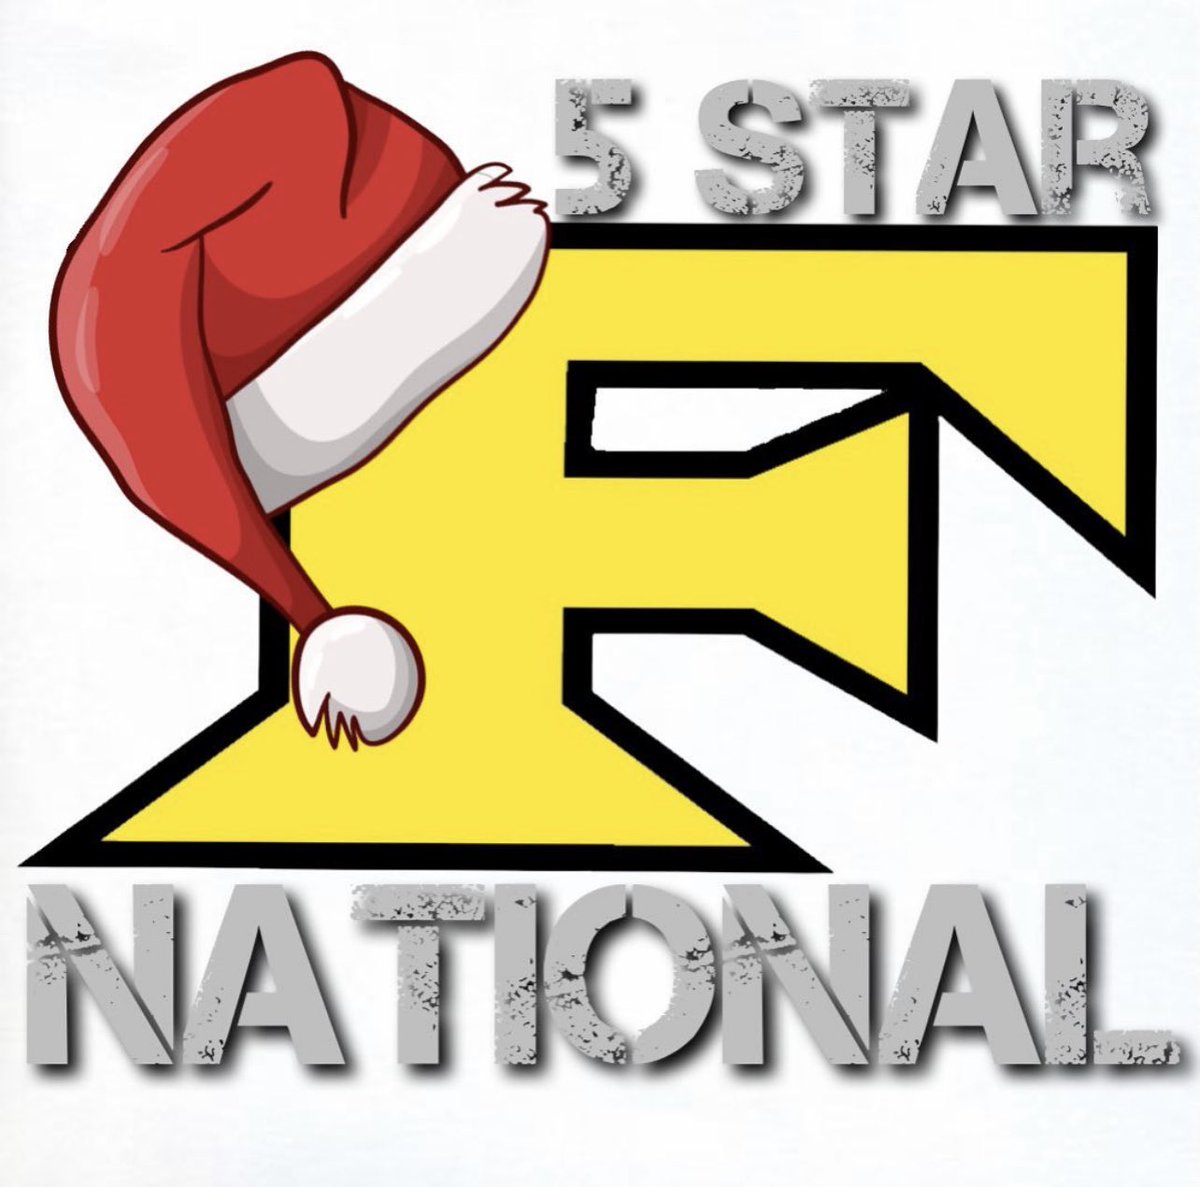 Merry Christmas from the 5 Star National Family! Enjoy this day with family and friends, but take a moment to remember the true meaning of Christmas! #5starnational #maFia  #buildingathletes #Christmas #Godisgood #baseball